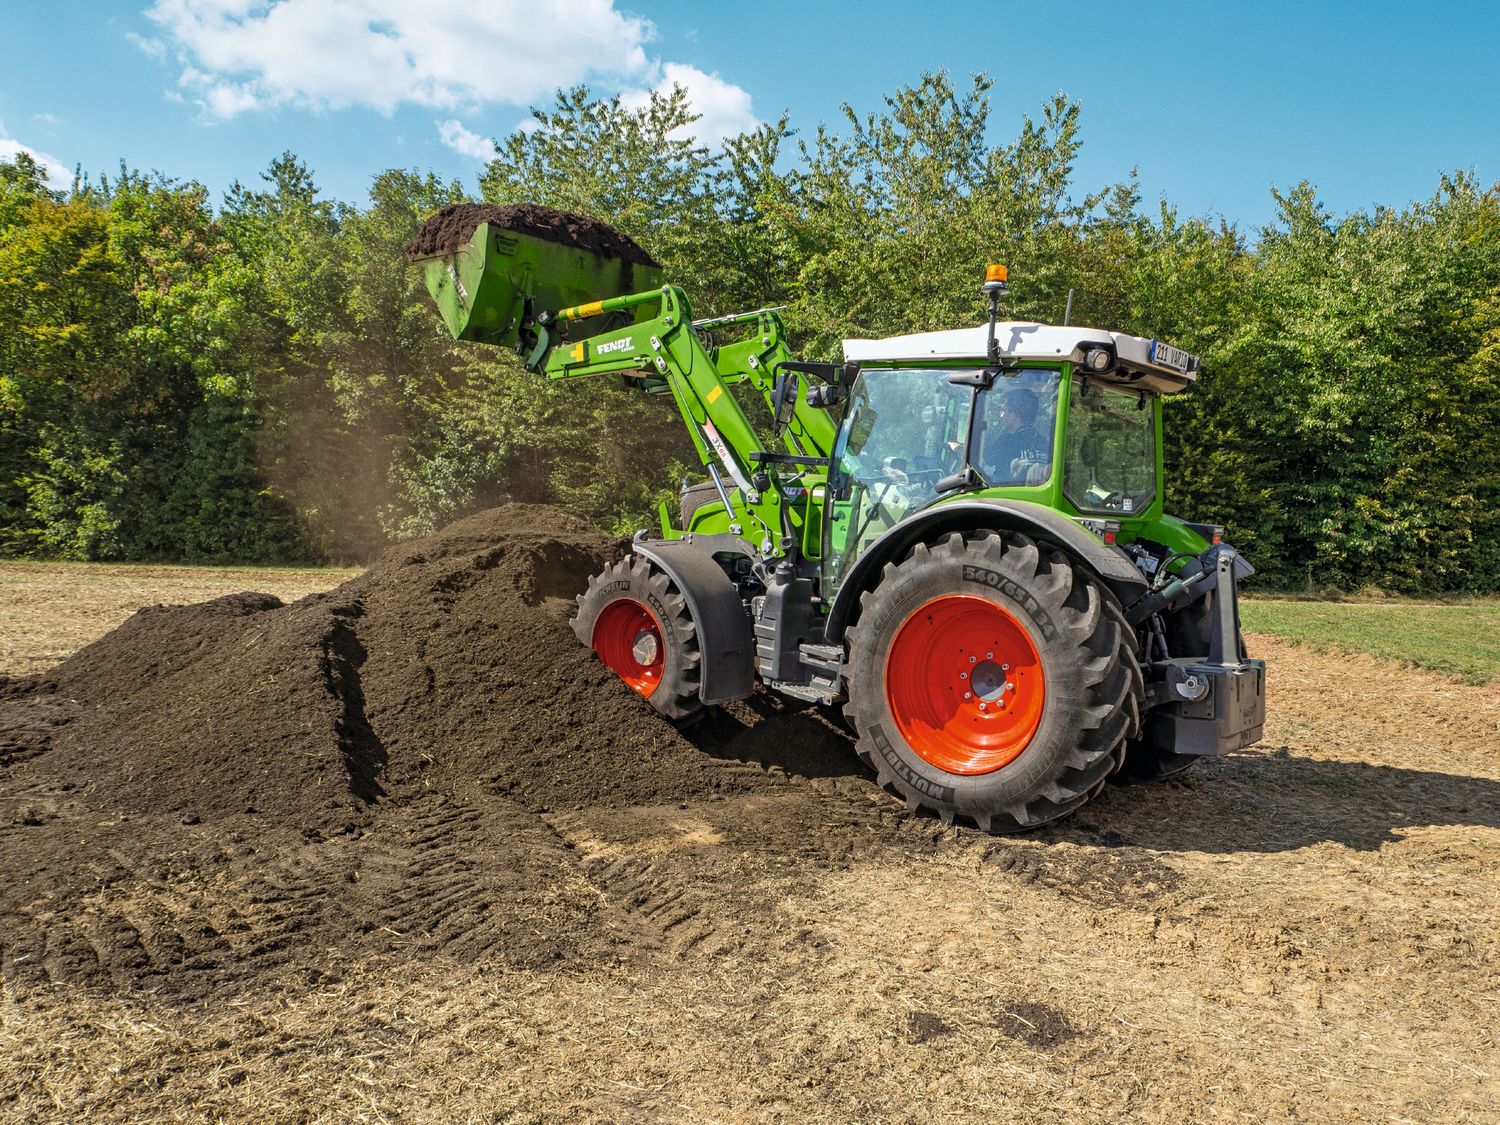 AGCO’s Fendt® Brand Introduces the 200 Vario® Series to North America to Provide Customers with a Compact and Agile Solution